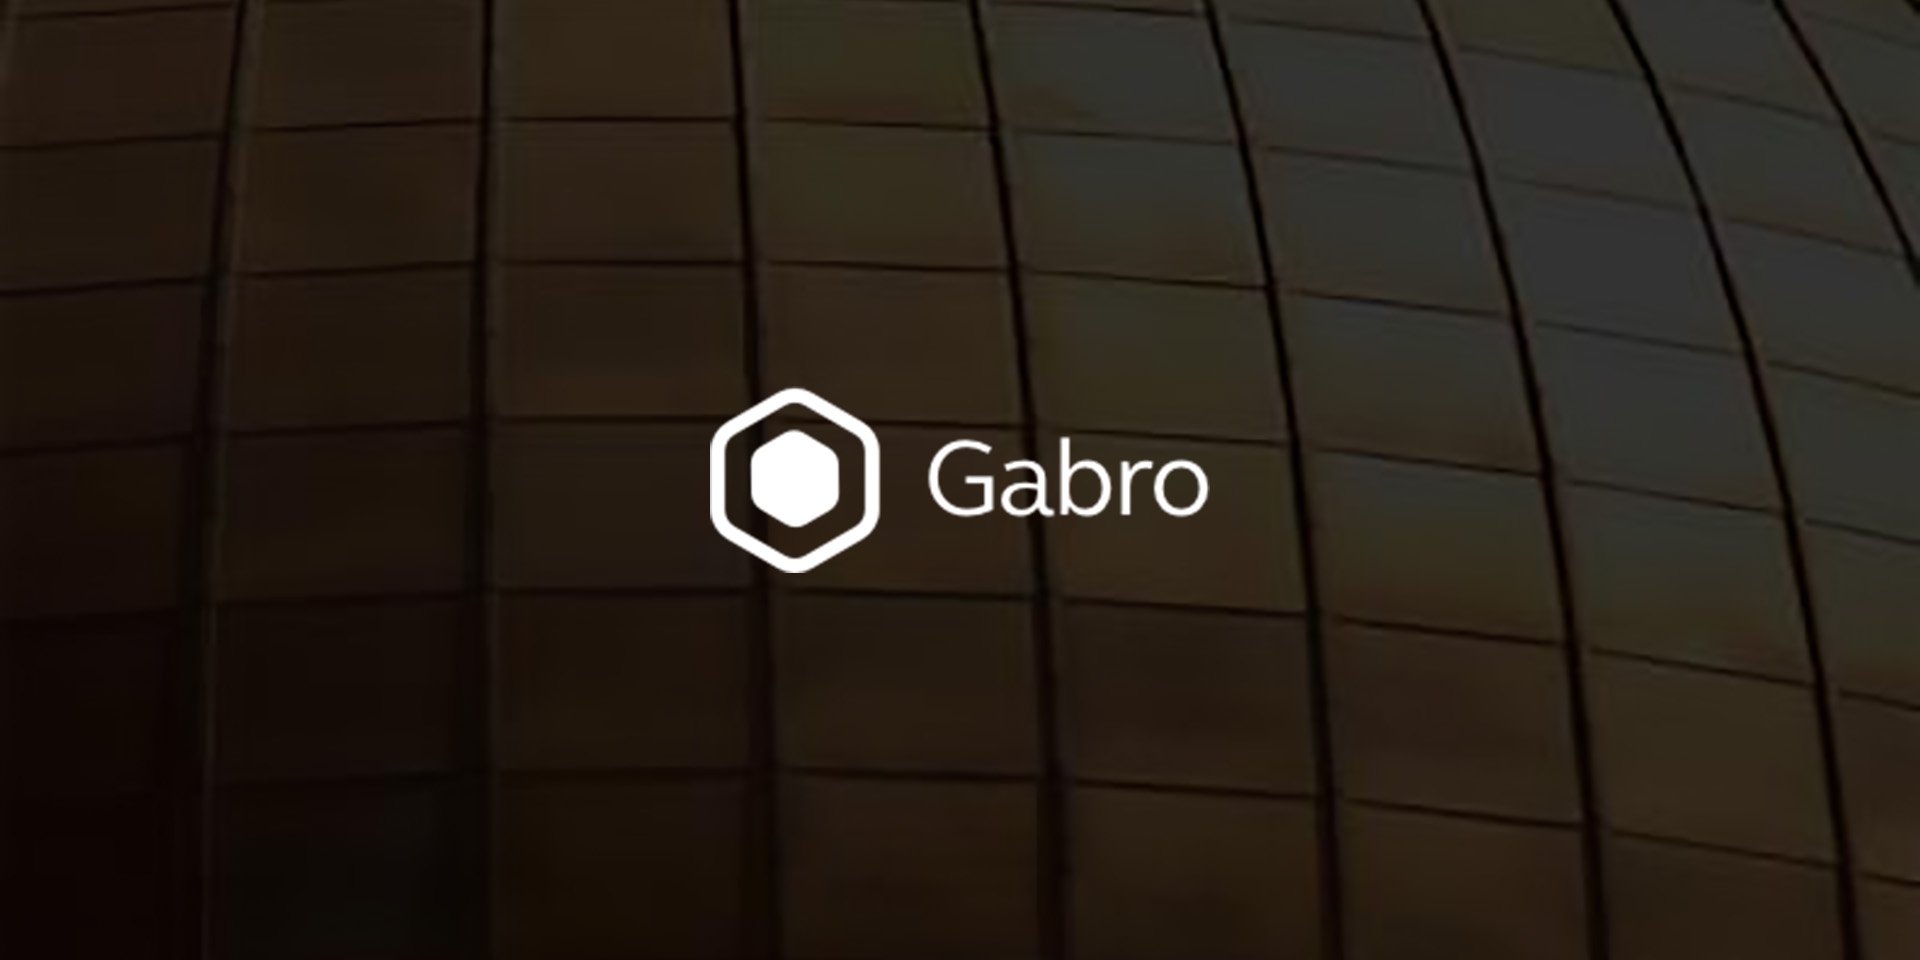 The Gabro Wallet application sends instant payment notifications and shows analytics that automatically categorizes their transactions, allowing users to keep track of all payments made with the prepaid card.